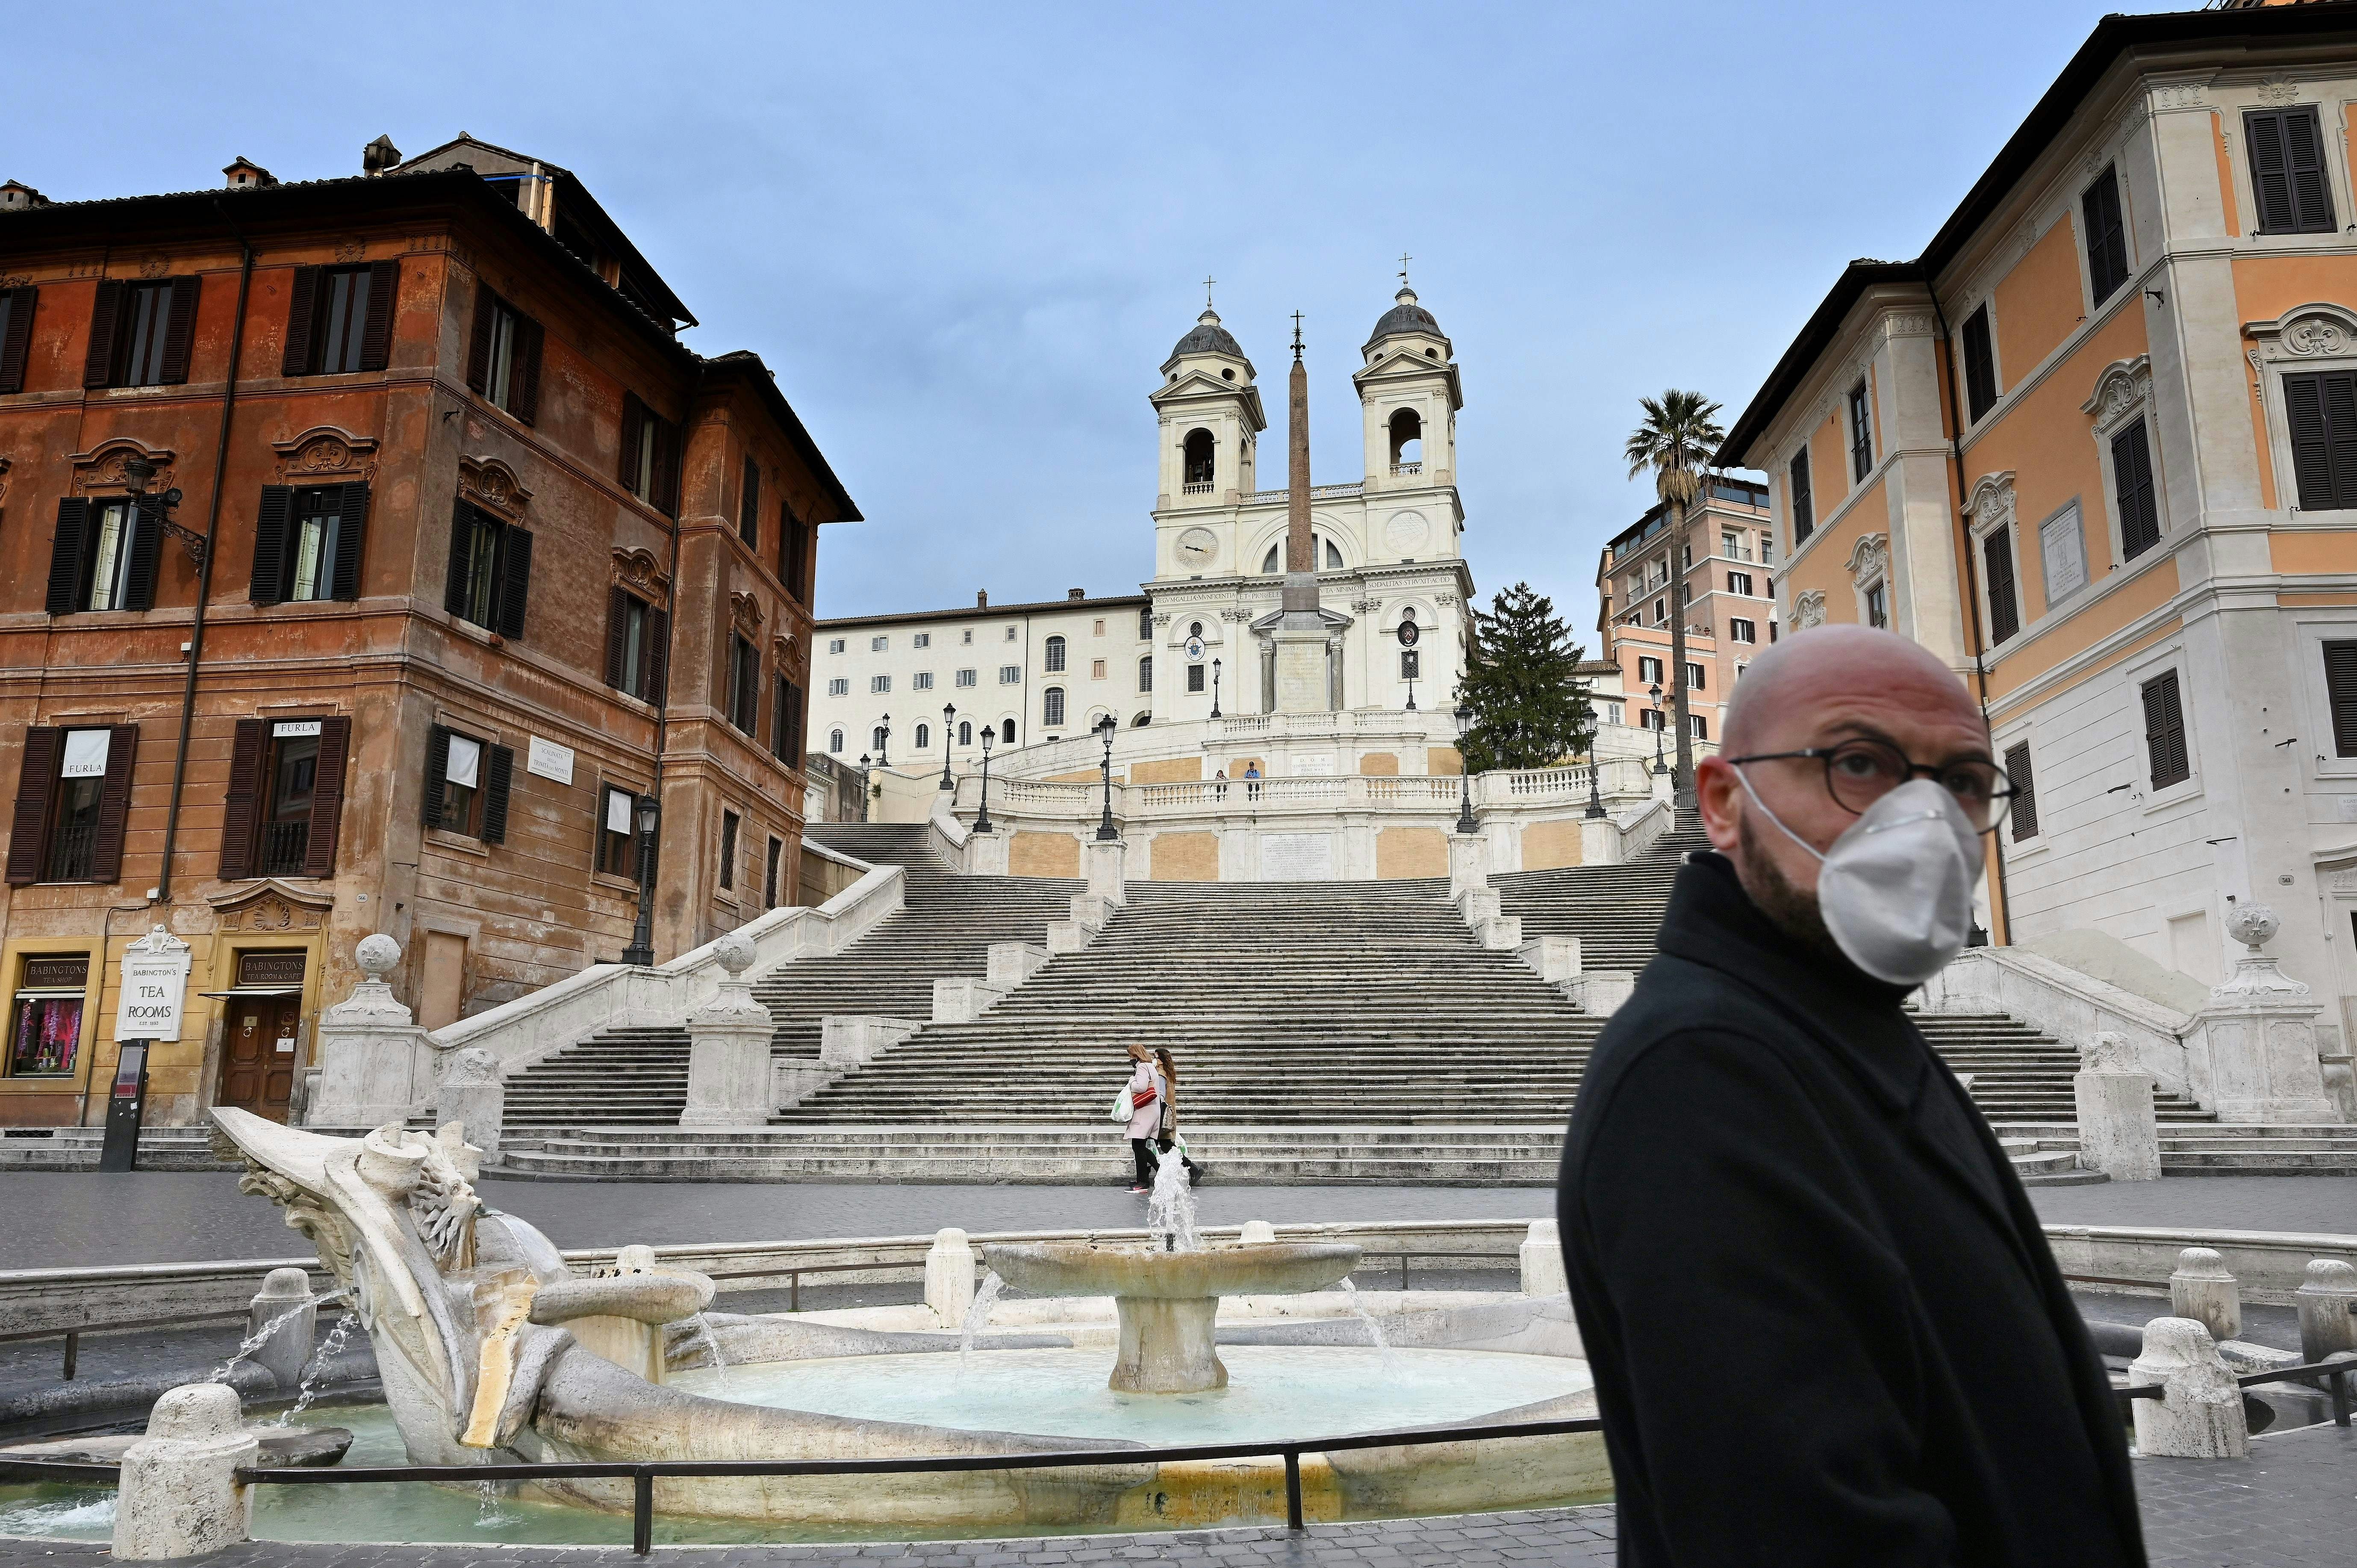 A man in a face mask walks past the Spanish Steps in Rome during the coronavirus lockdown in Italy.